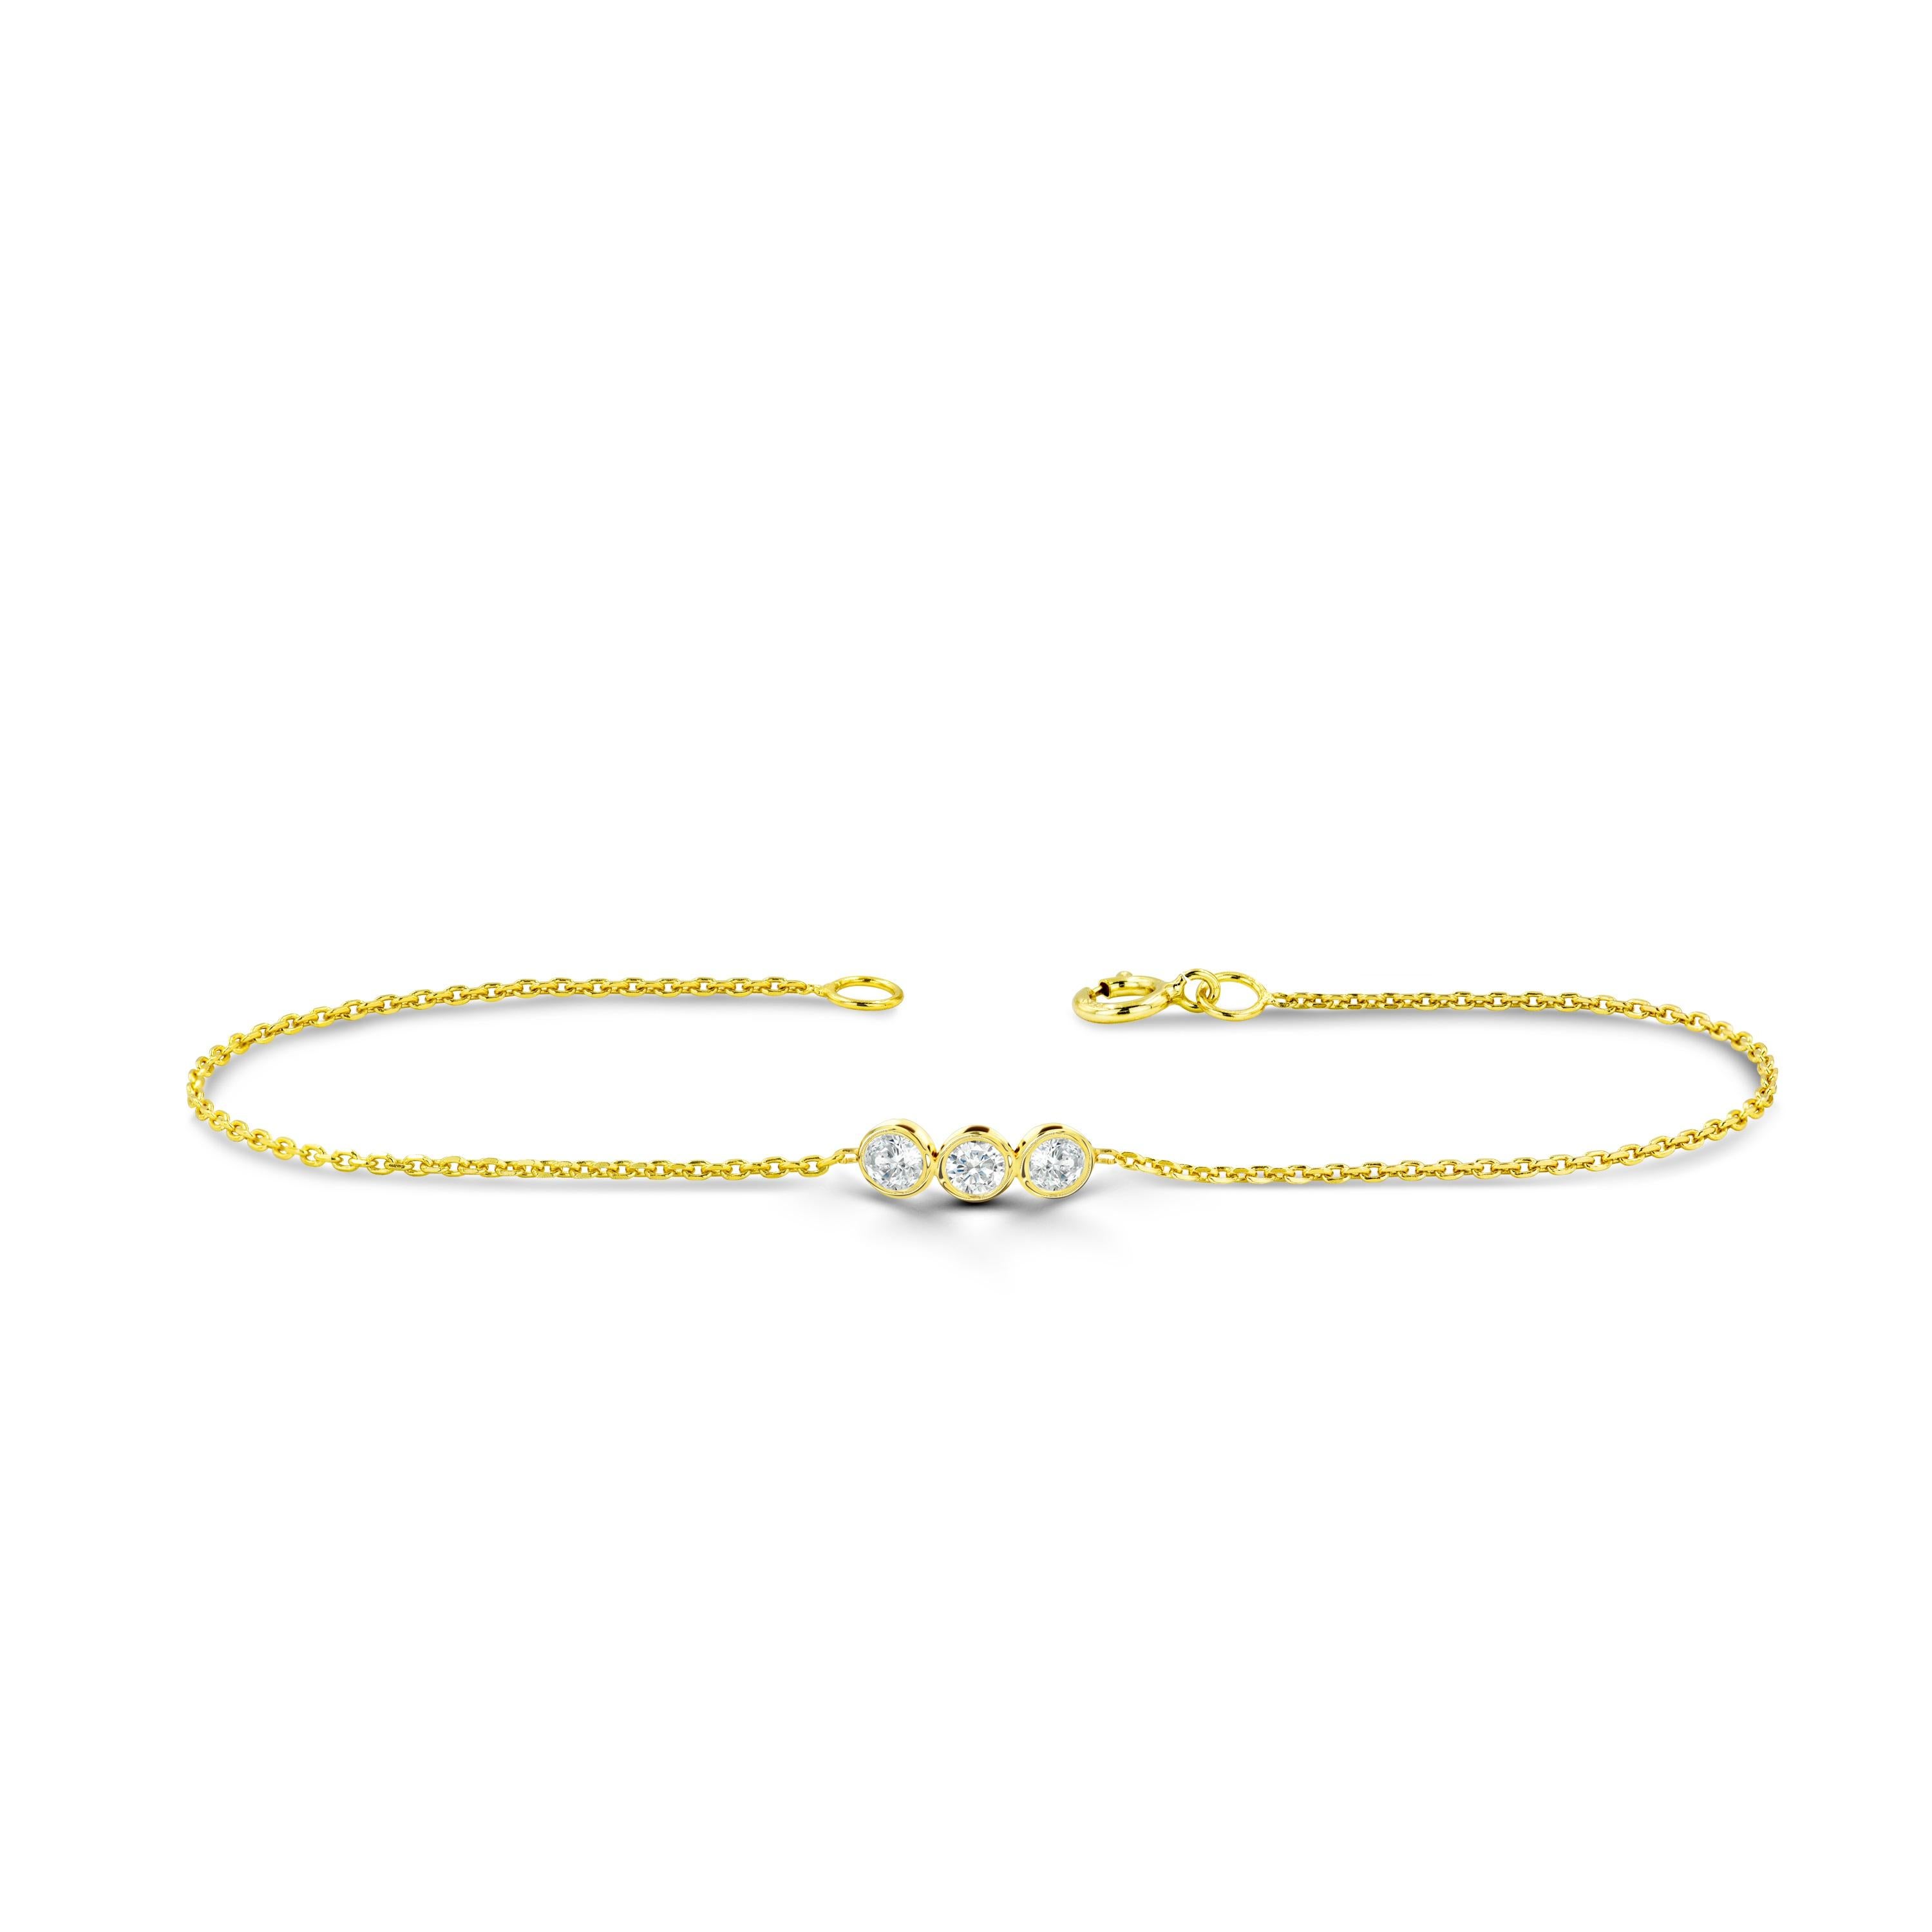 Delicate Minimal Bracelet is made of 14k solid gold.
Available in three colors of gold: White Gold / Rose Gold / Yellow Gold.

Natural genuine round cut diamond each diamond is hand selected by me to ensure quality and set by a master setter in our